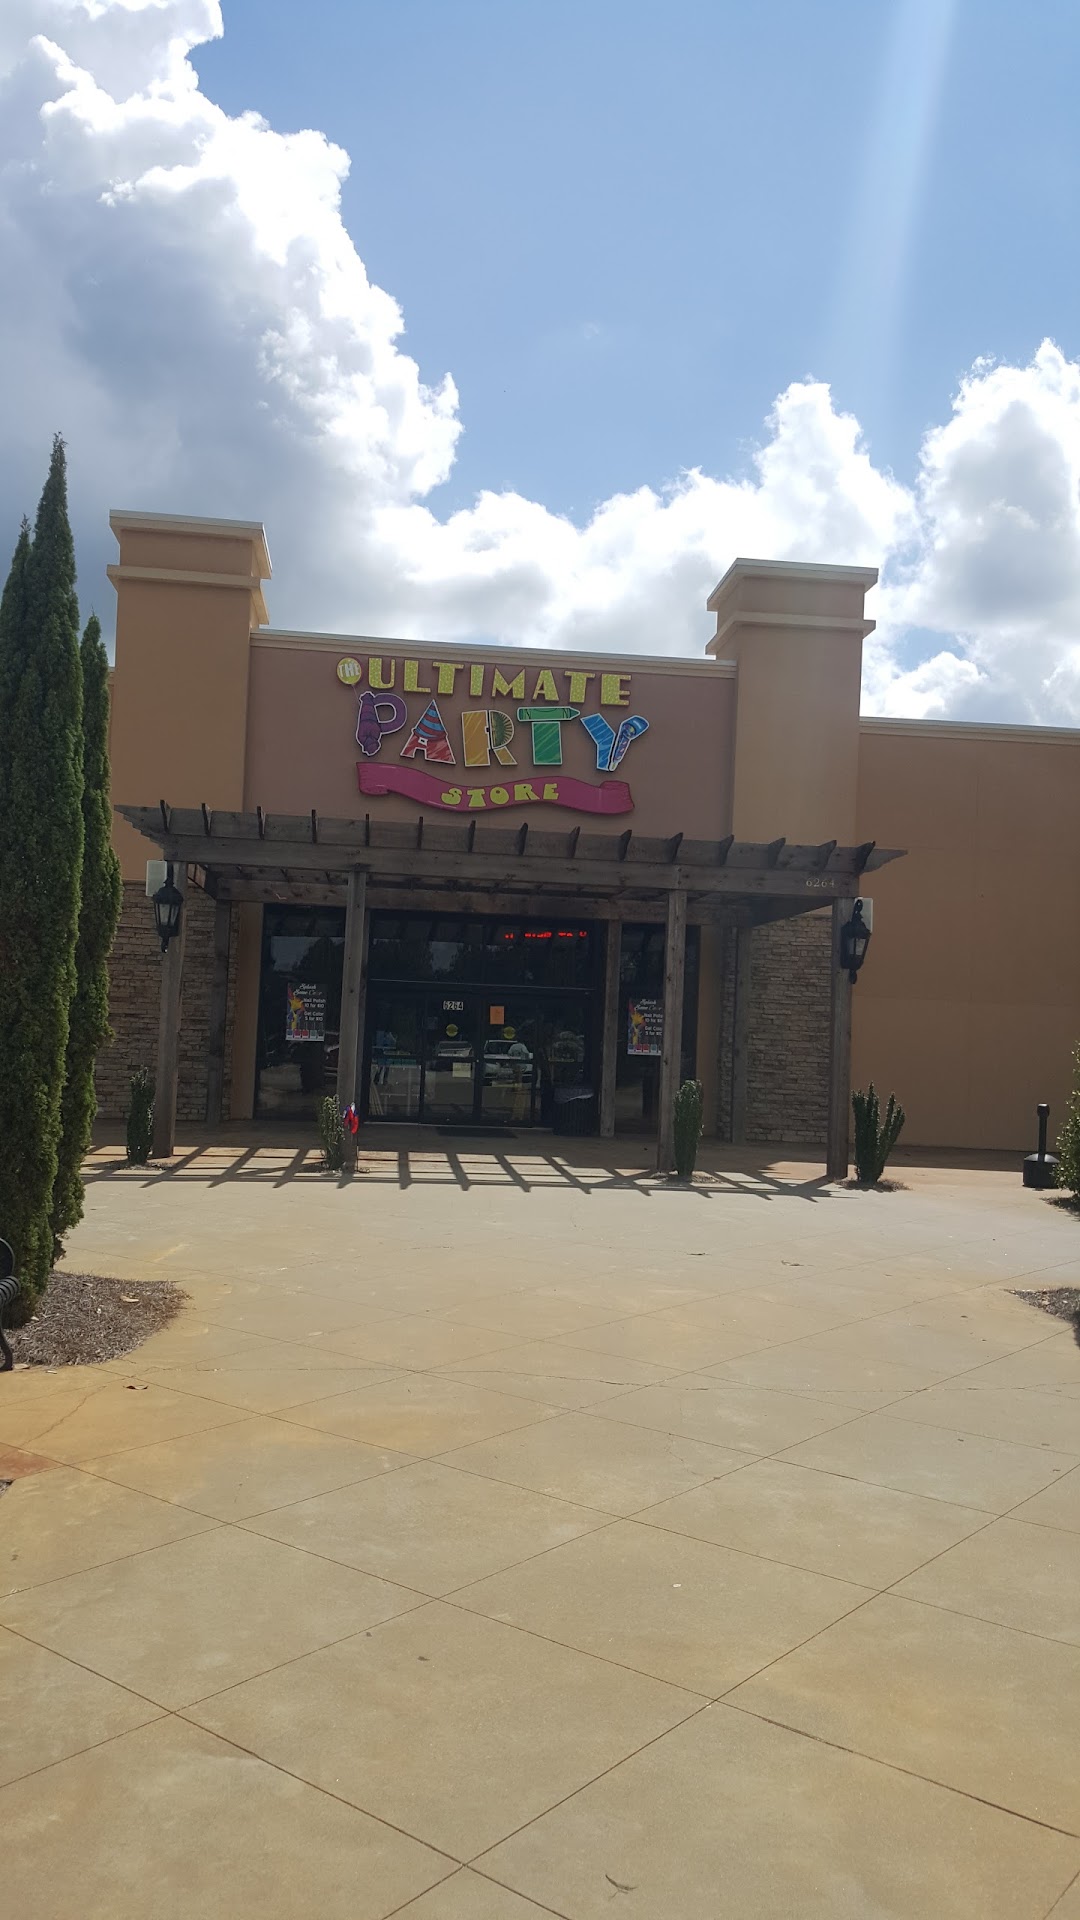 The Ultimate Party Store - Hattiesburg